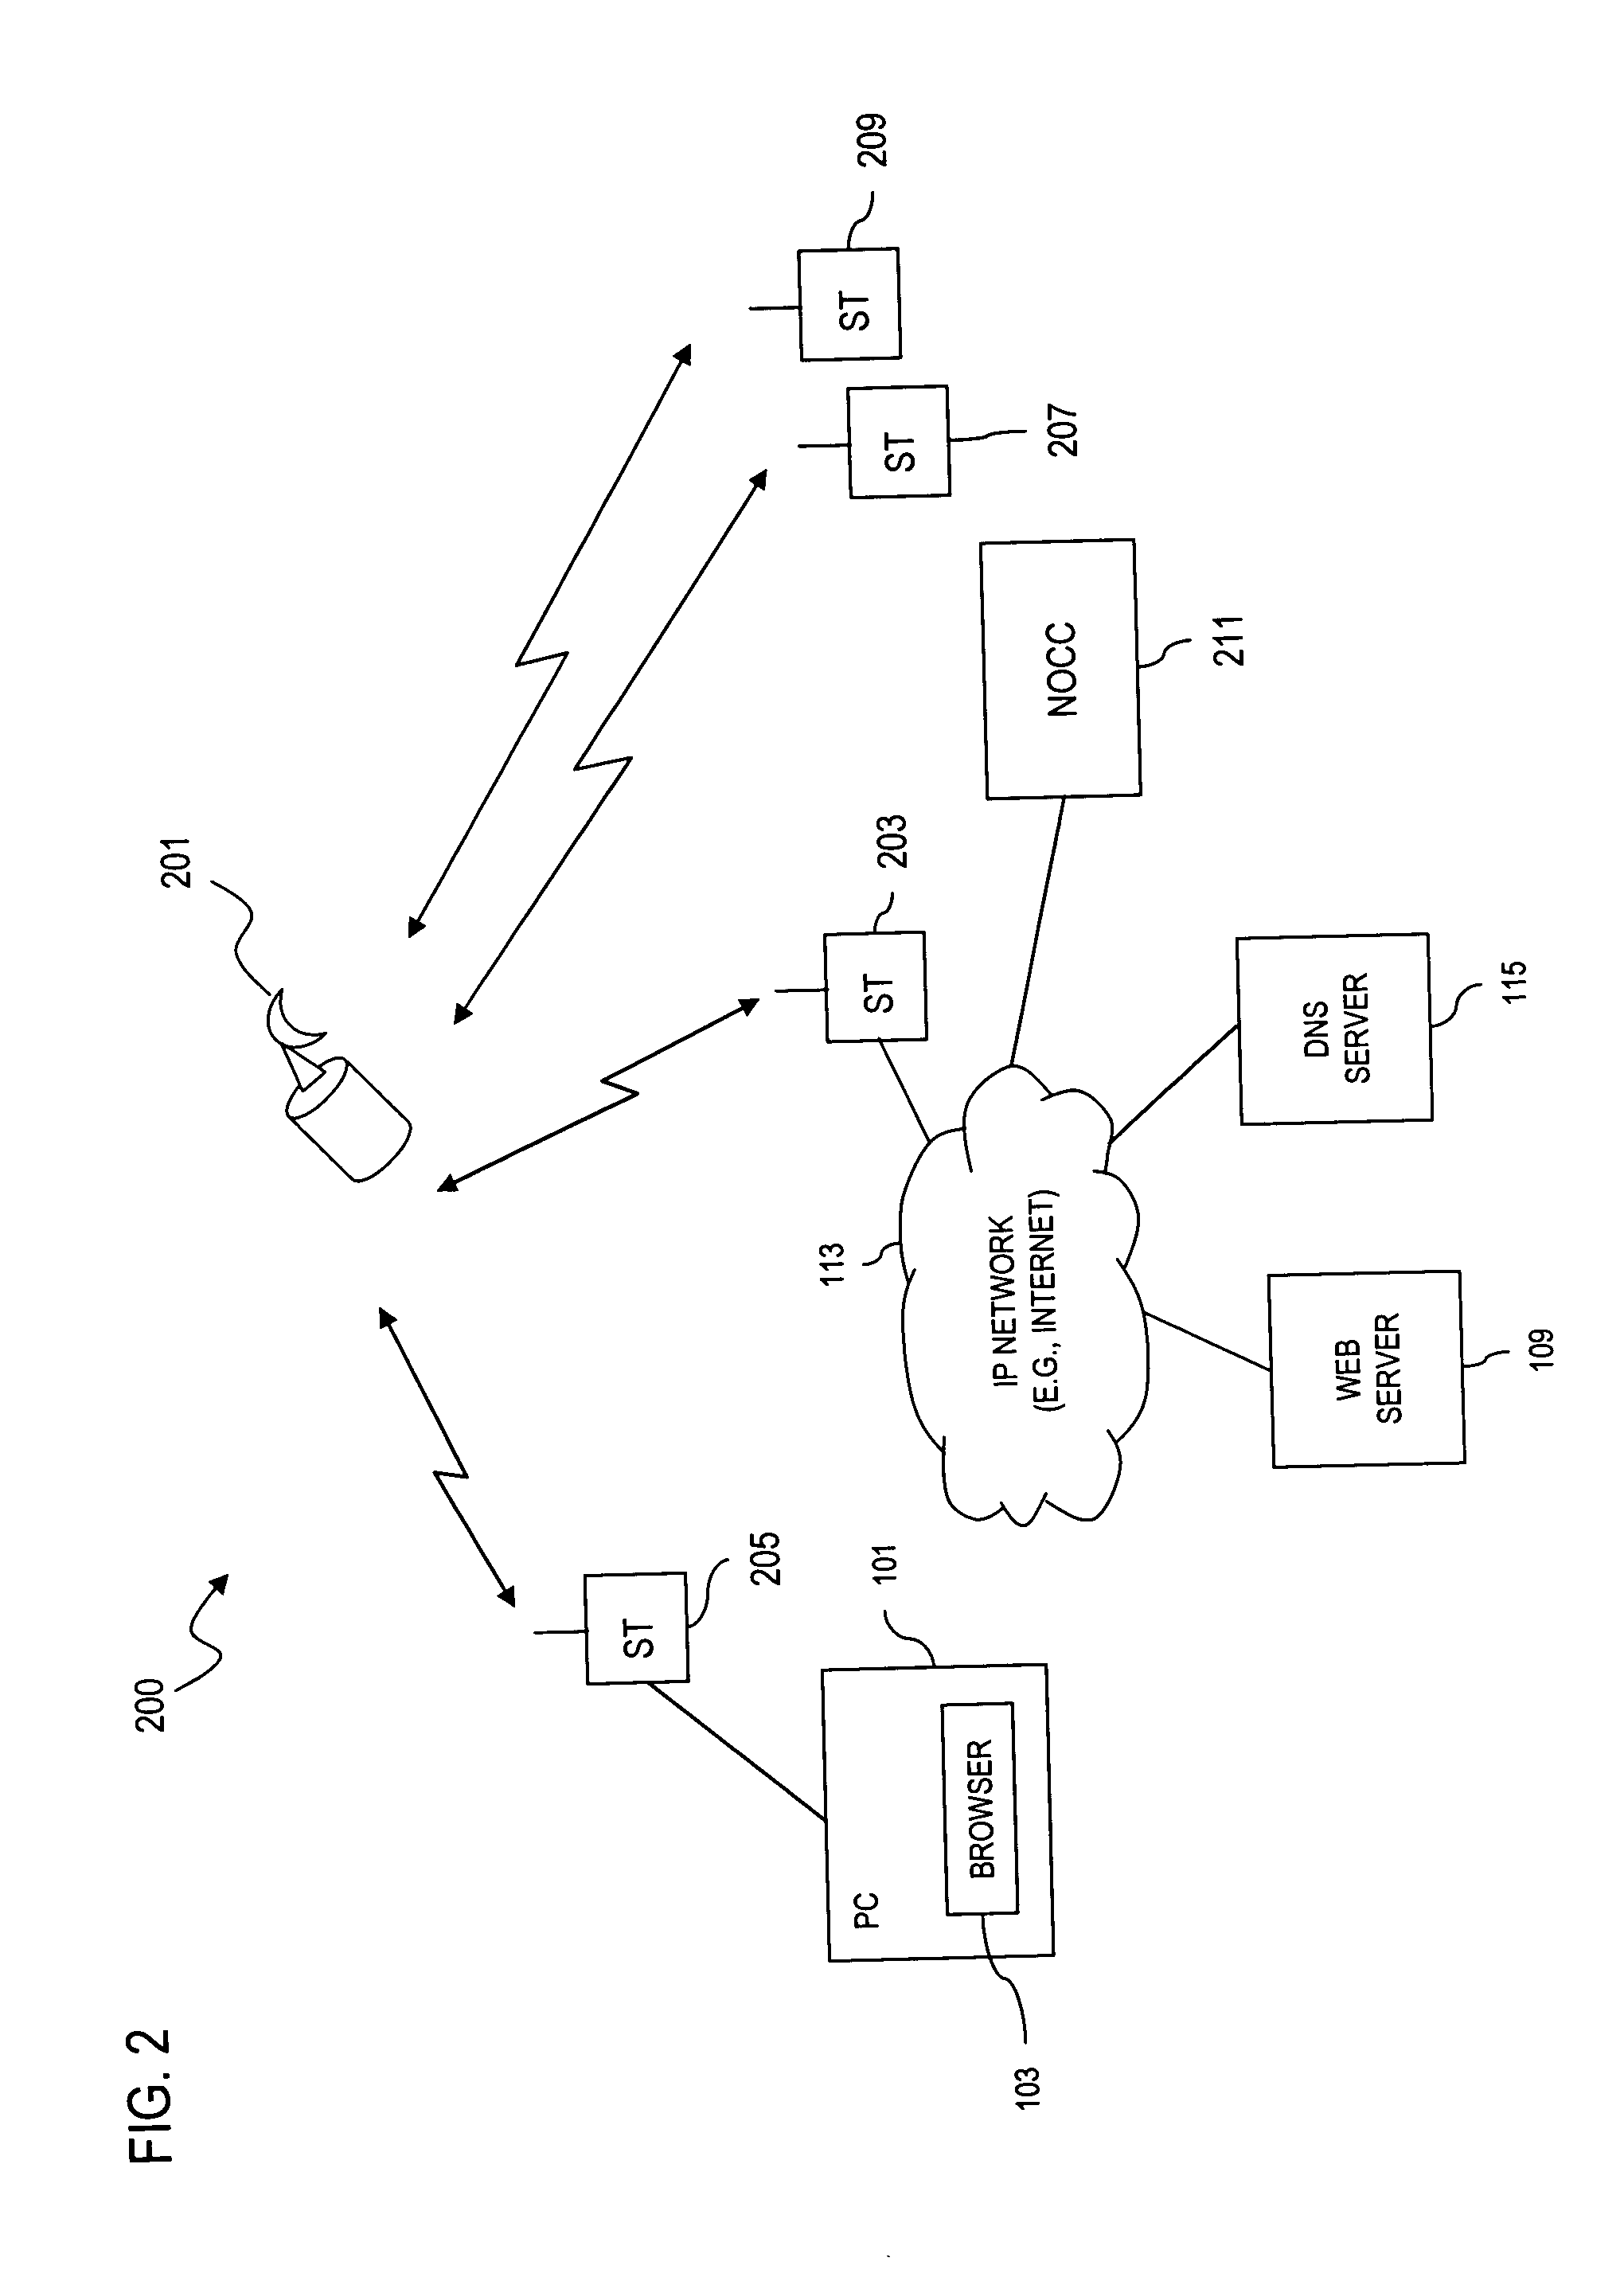 Method and system for providing enhanced performance of web browsing